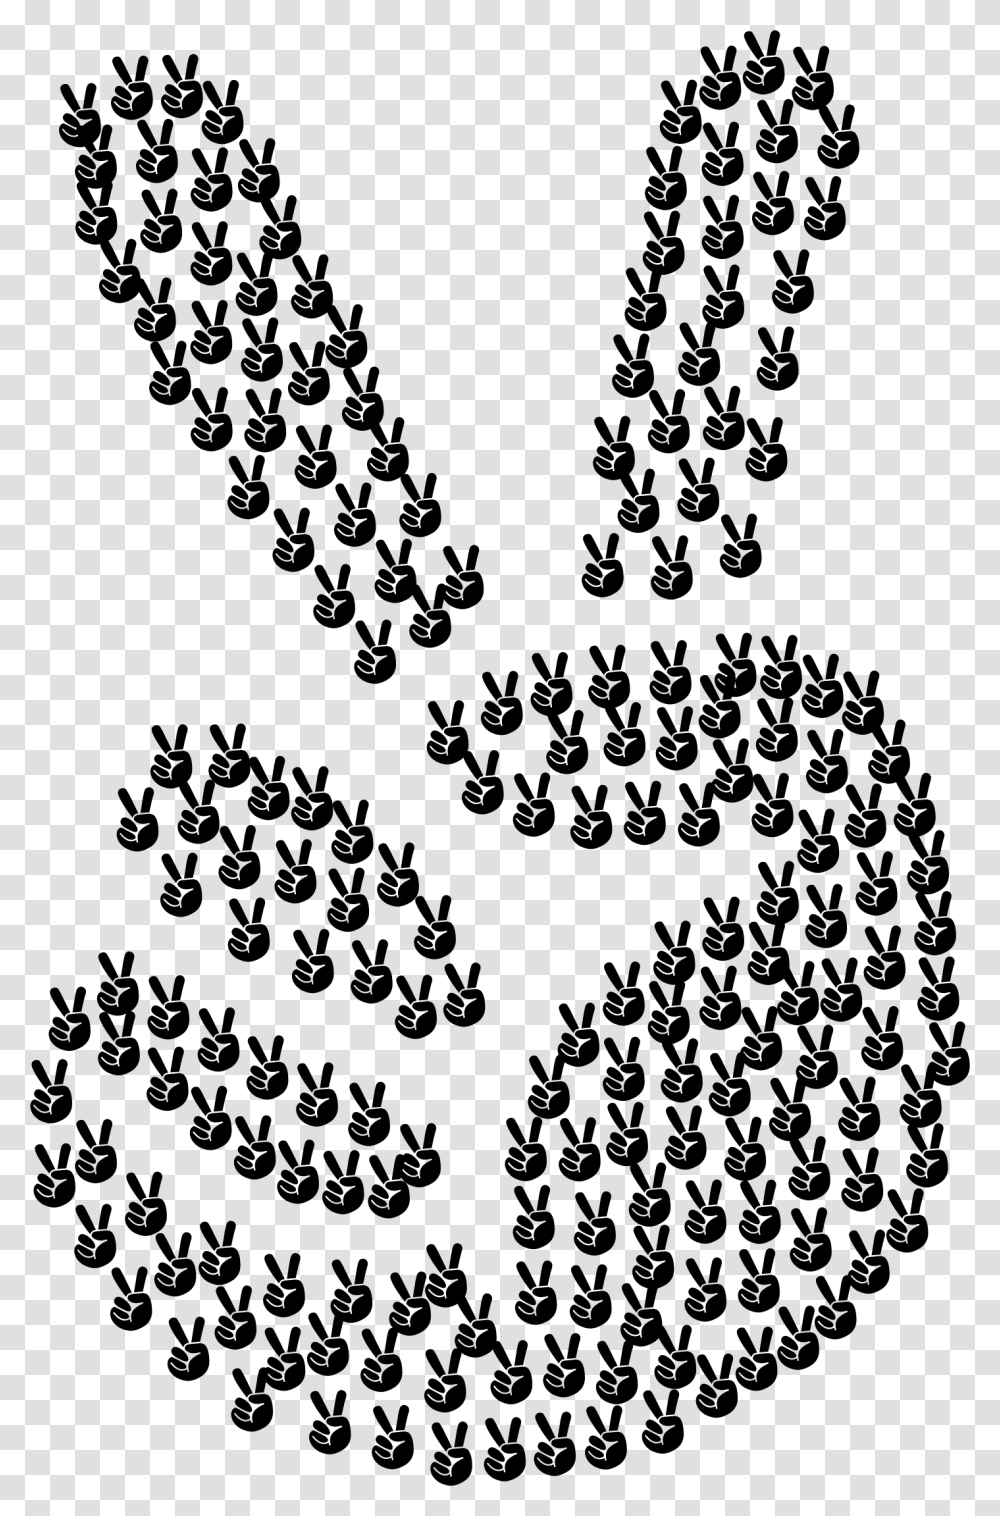 Comic Hand Peace Sign Fractal Clip Arts Hand Signal Peace Sign Images Free Clip Art, Gray Transparent Png